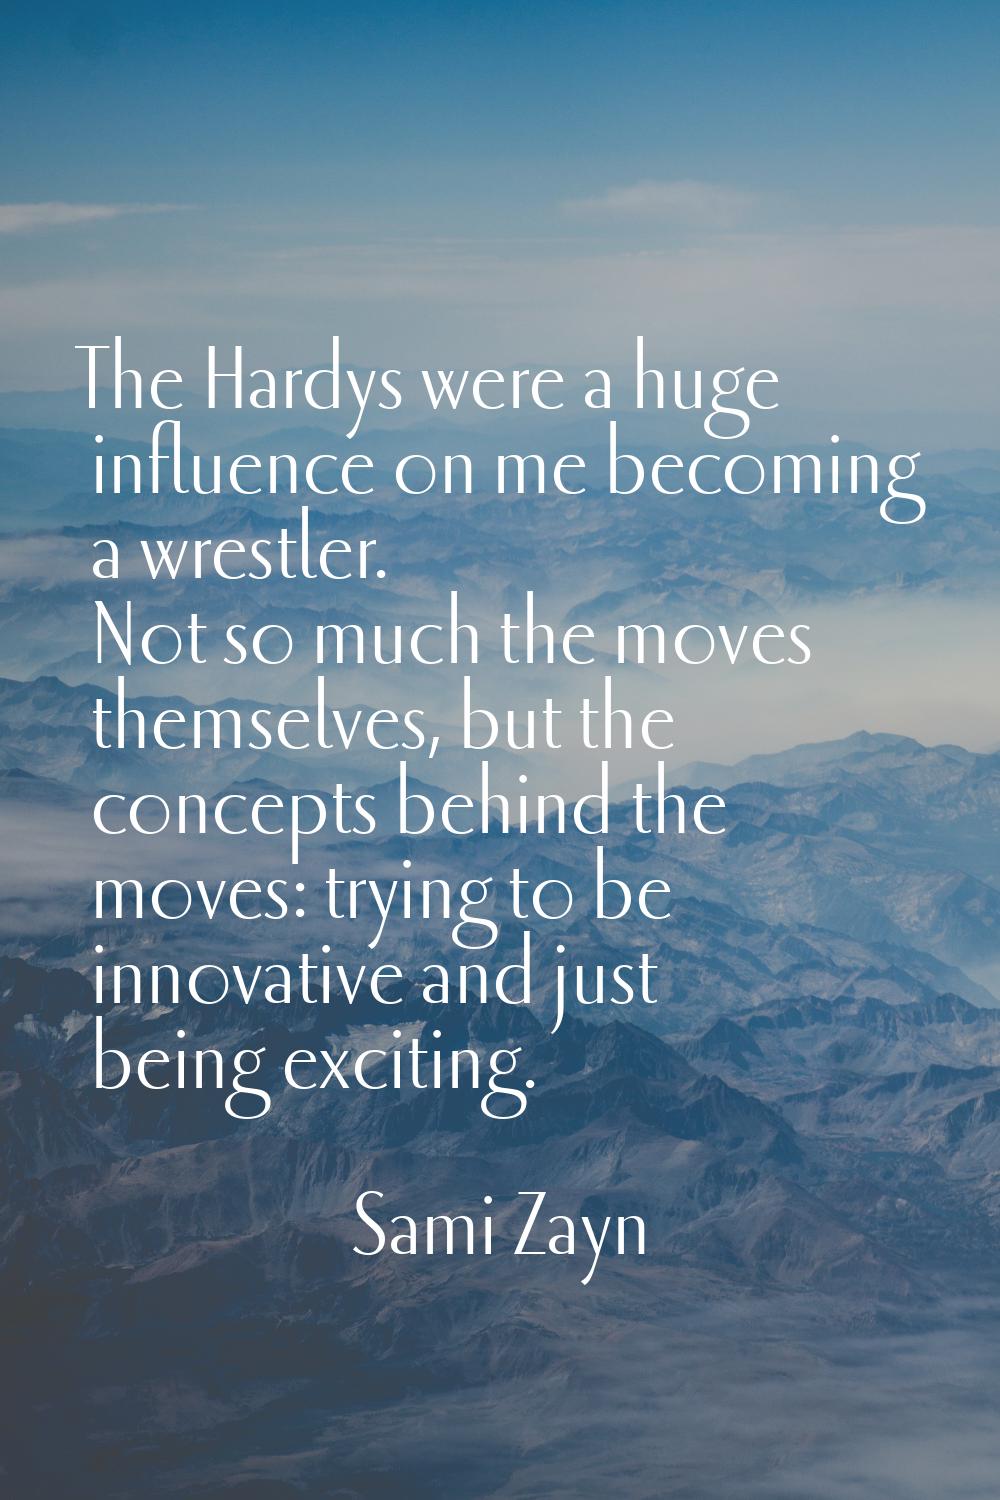 The Hardys were a huge influence on me becoming a wrestler. Not so much the moves themselves, but t